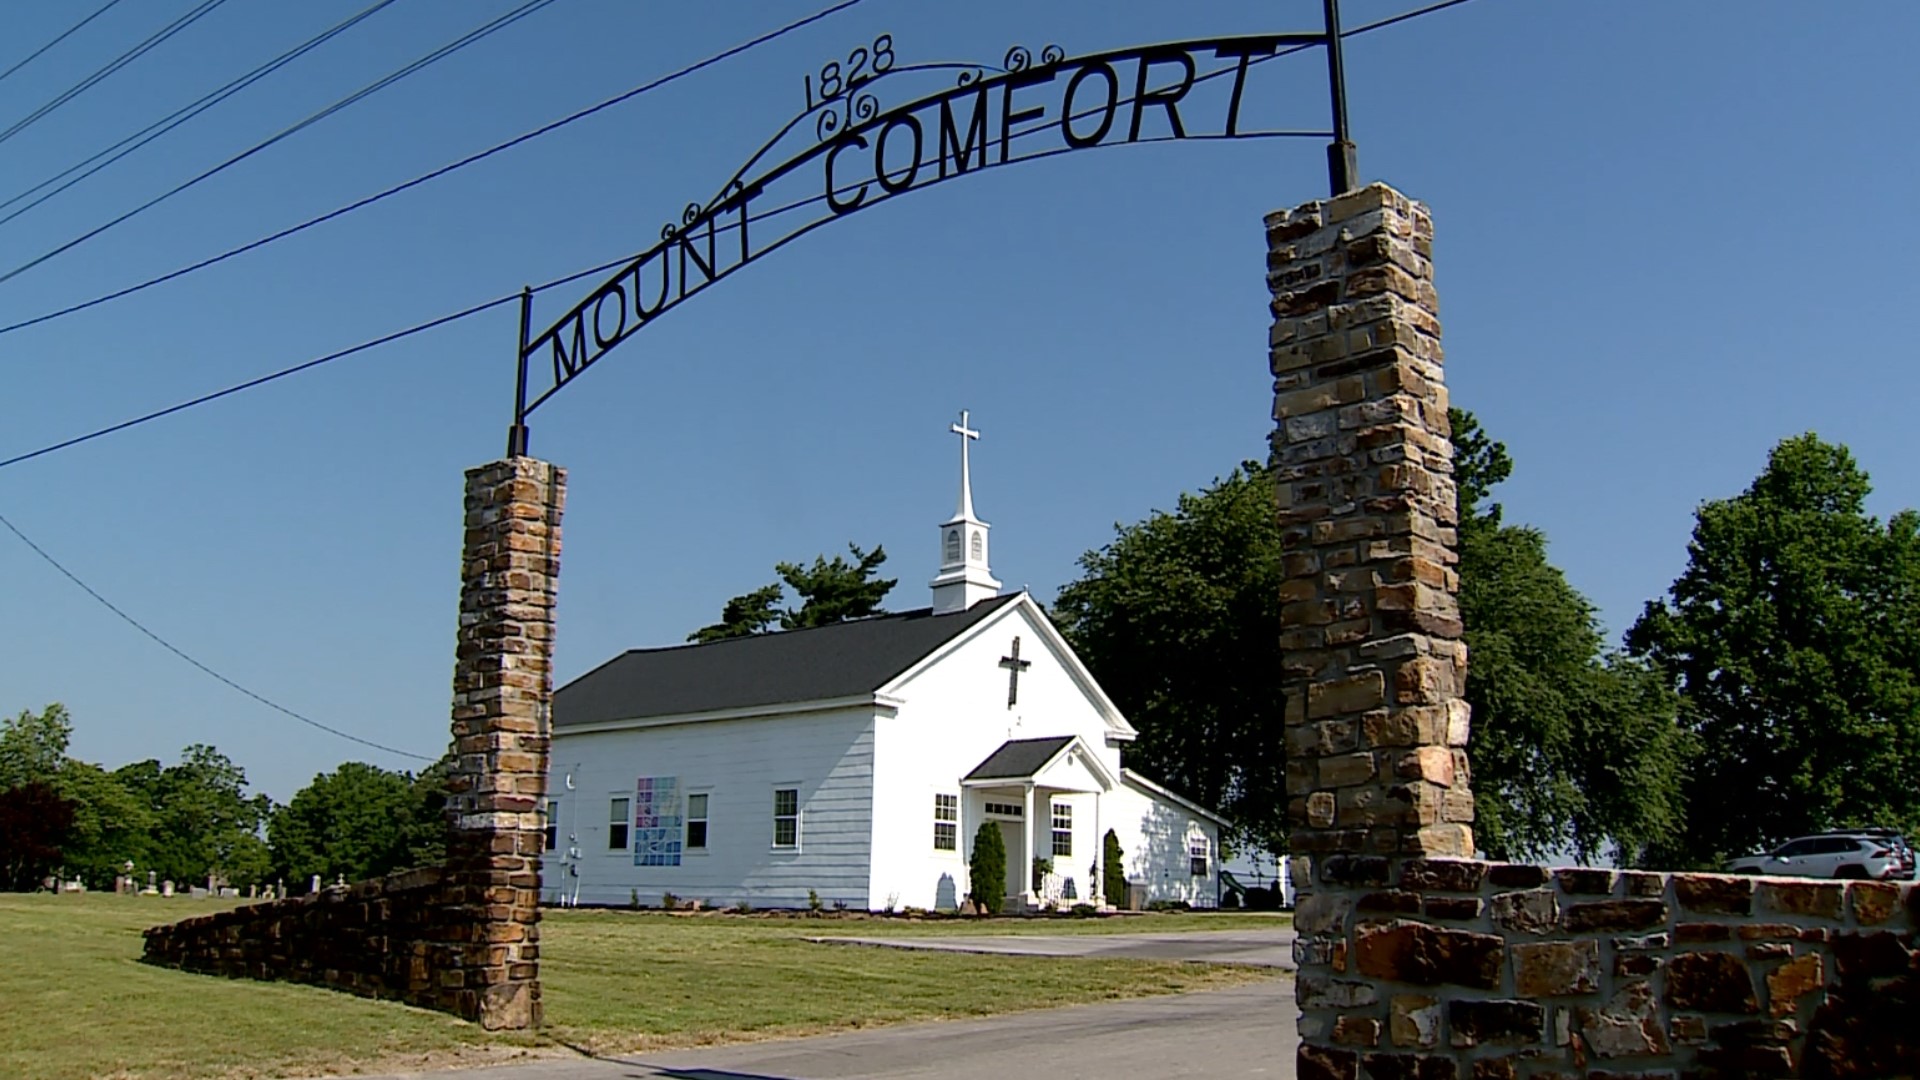 Mount Comfort Church in Fayetteville is celebrating 195 years. It is said to be the oldest historical church site in Northwest Arkansas.